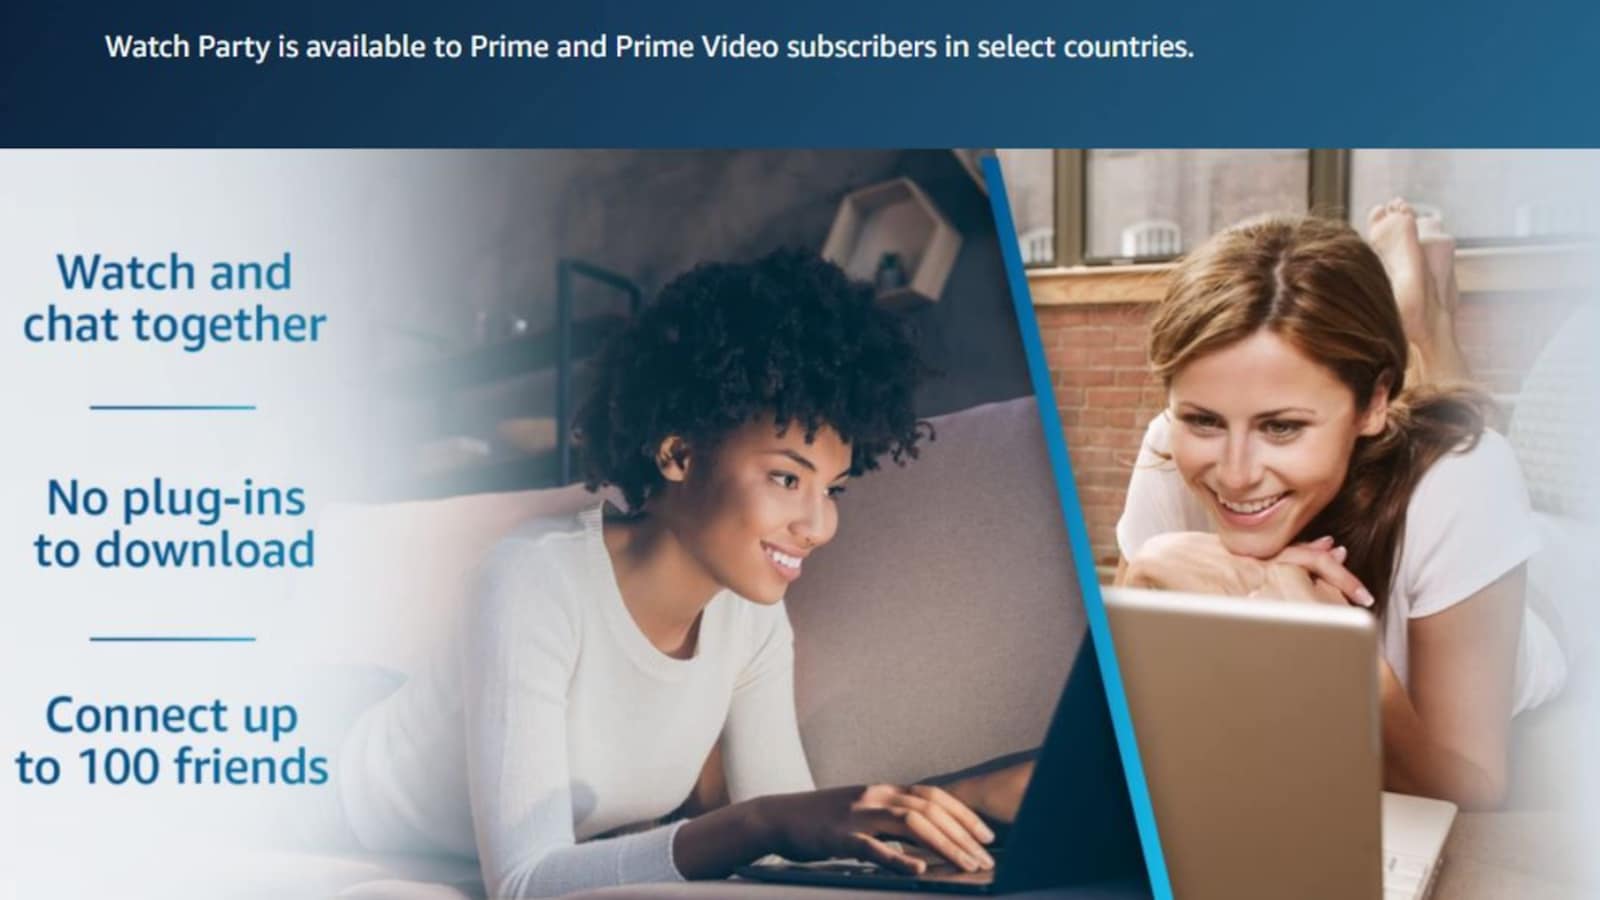 Prime Video Launches Watch Party in India 